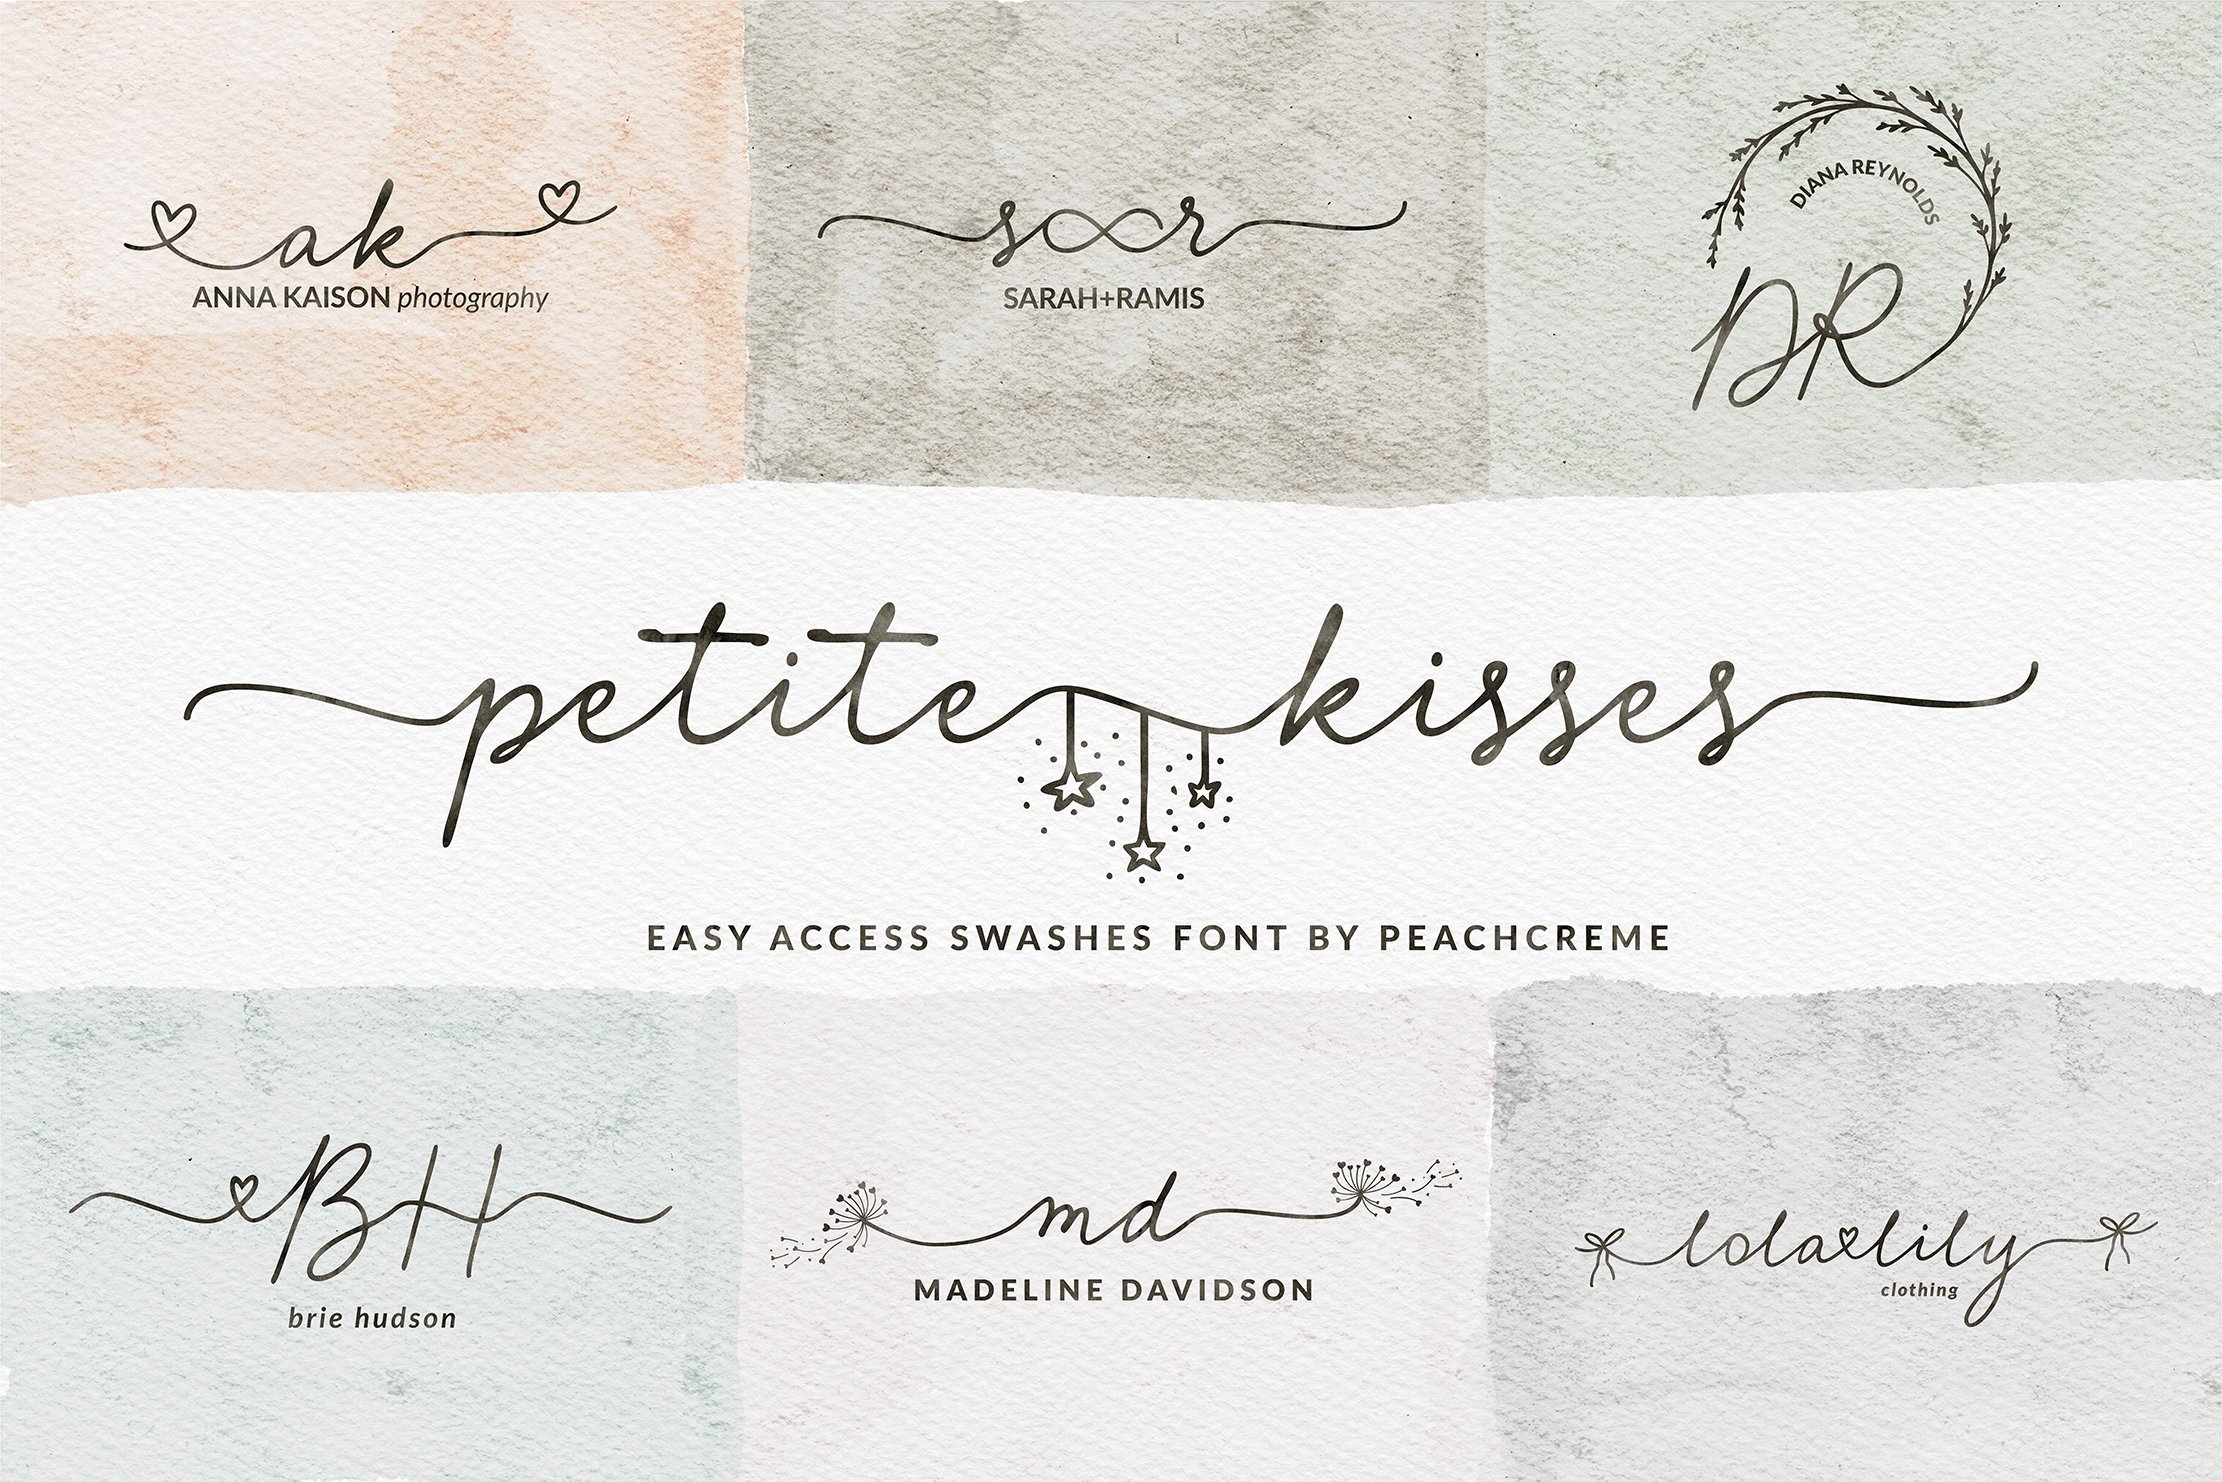 Petite Kisses//super easy swashes! cover image.